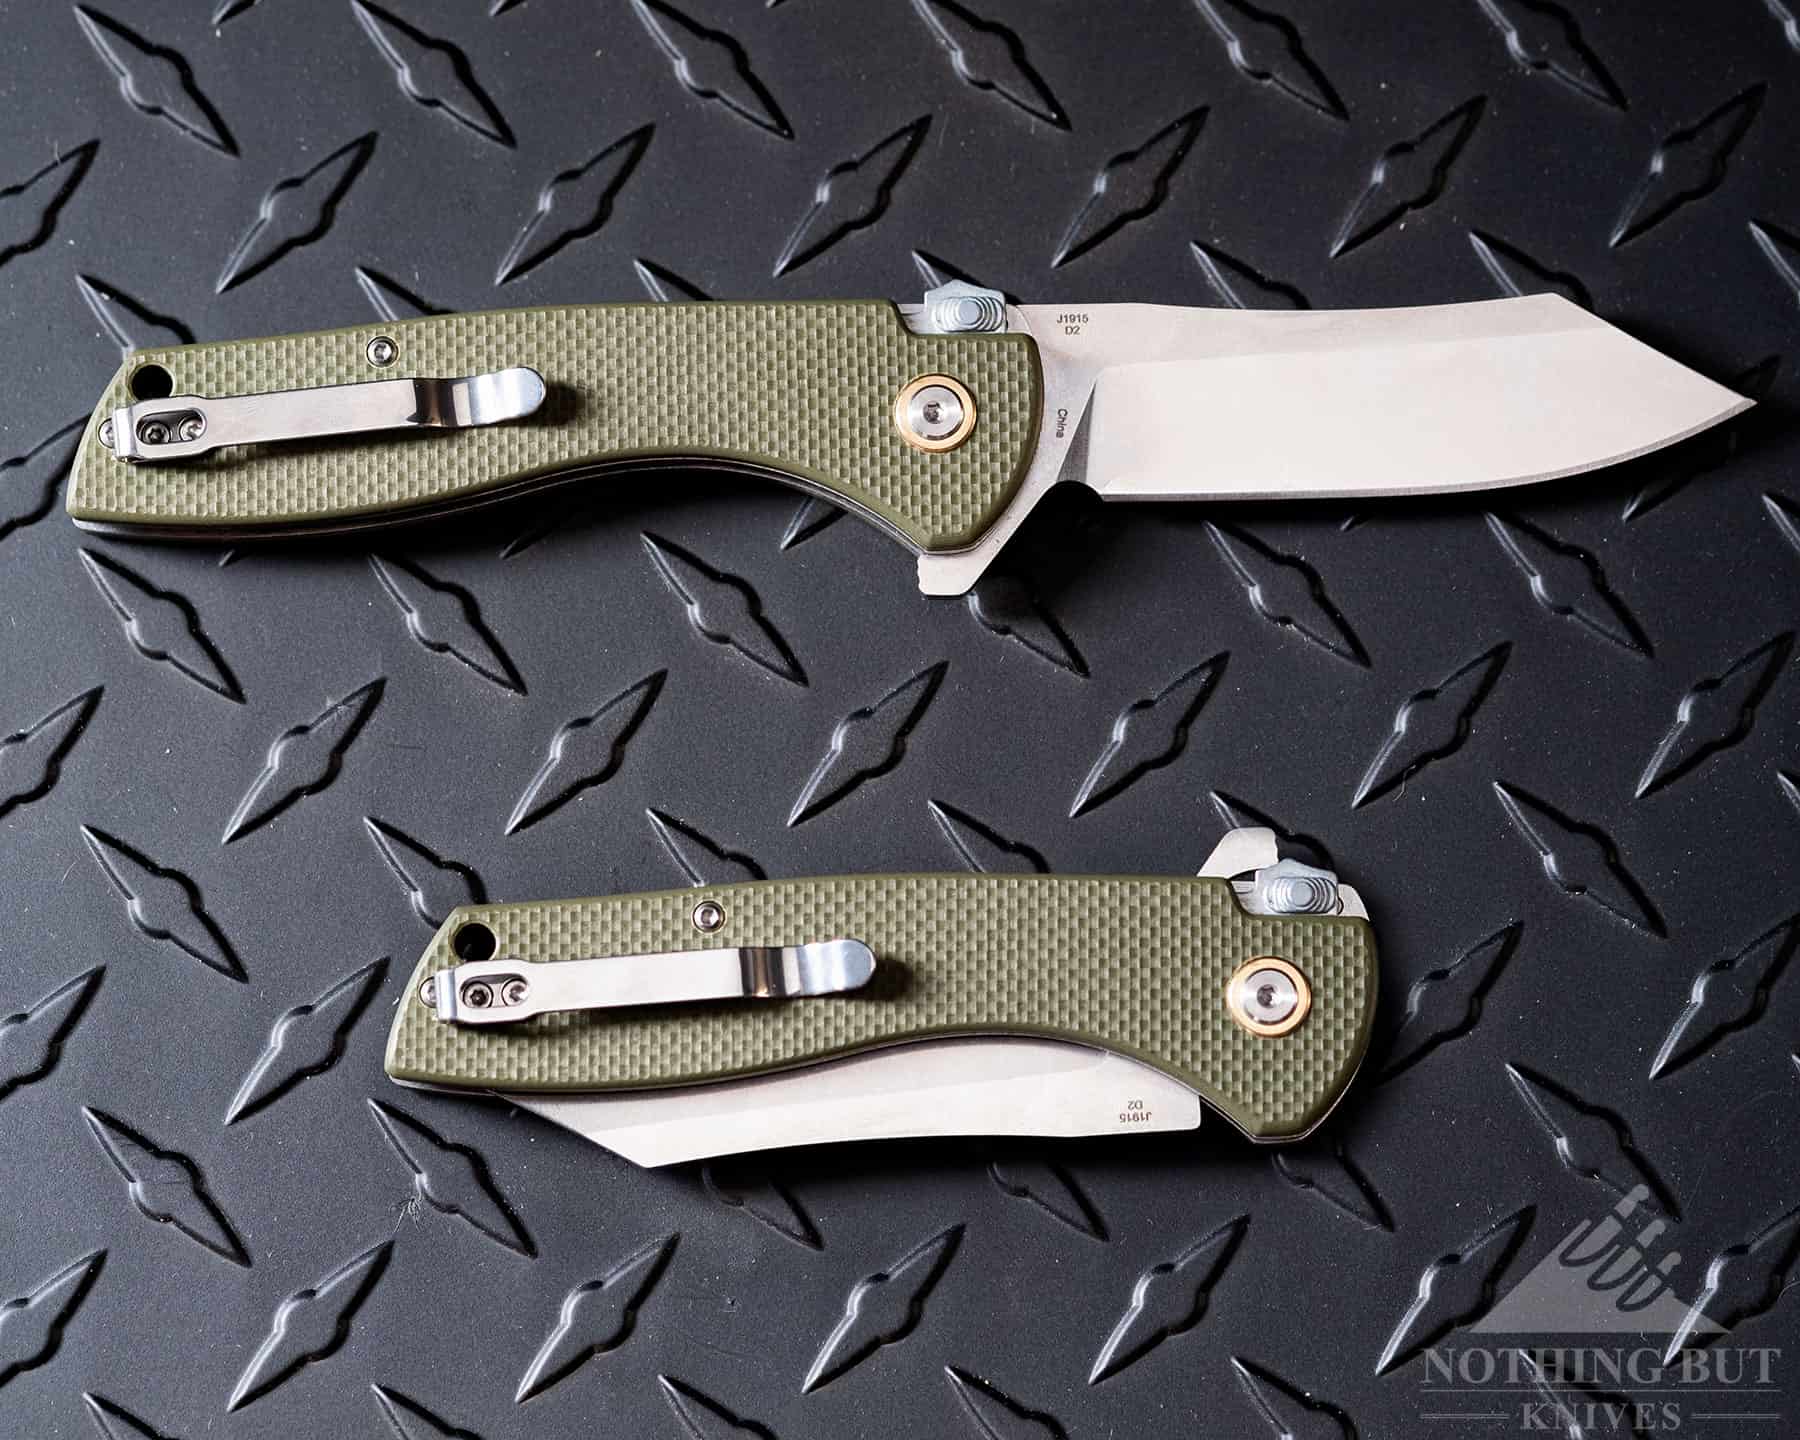 The OD green version of the CJRB Kicker folding knife in the open position on top and closed position on the bottom.